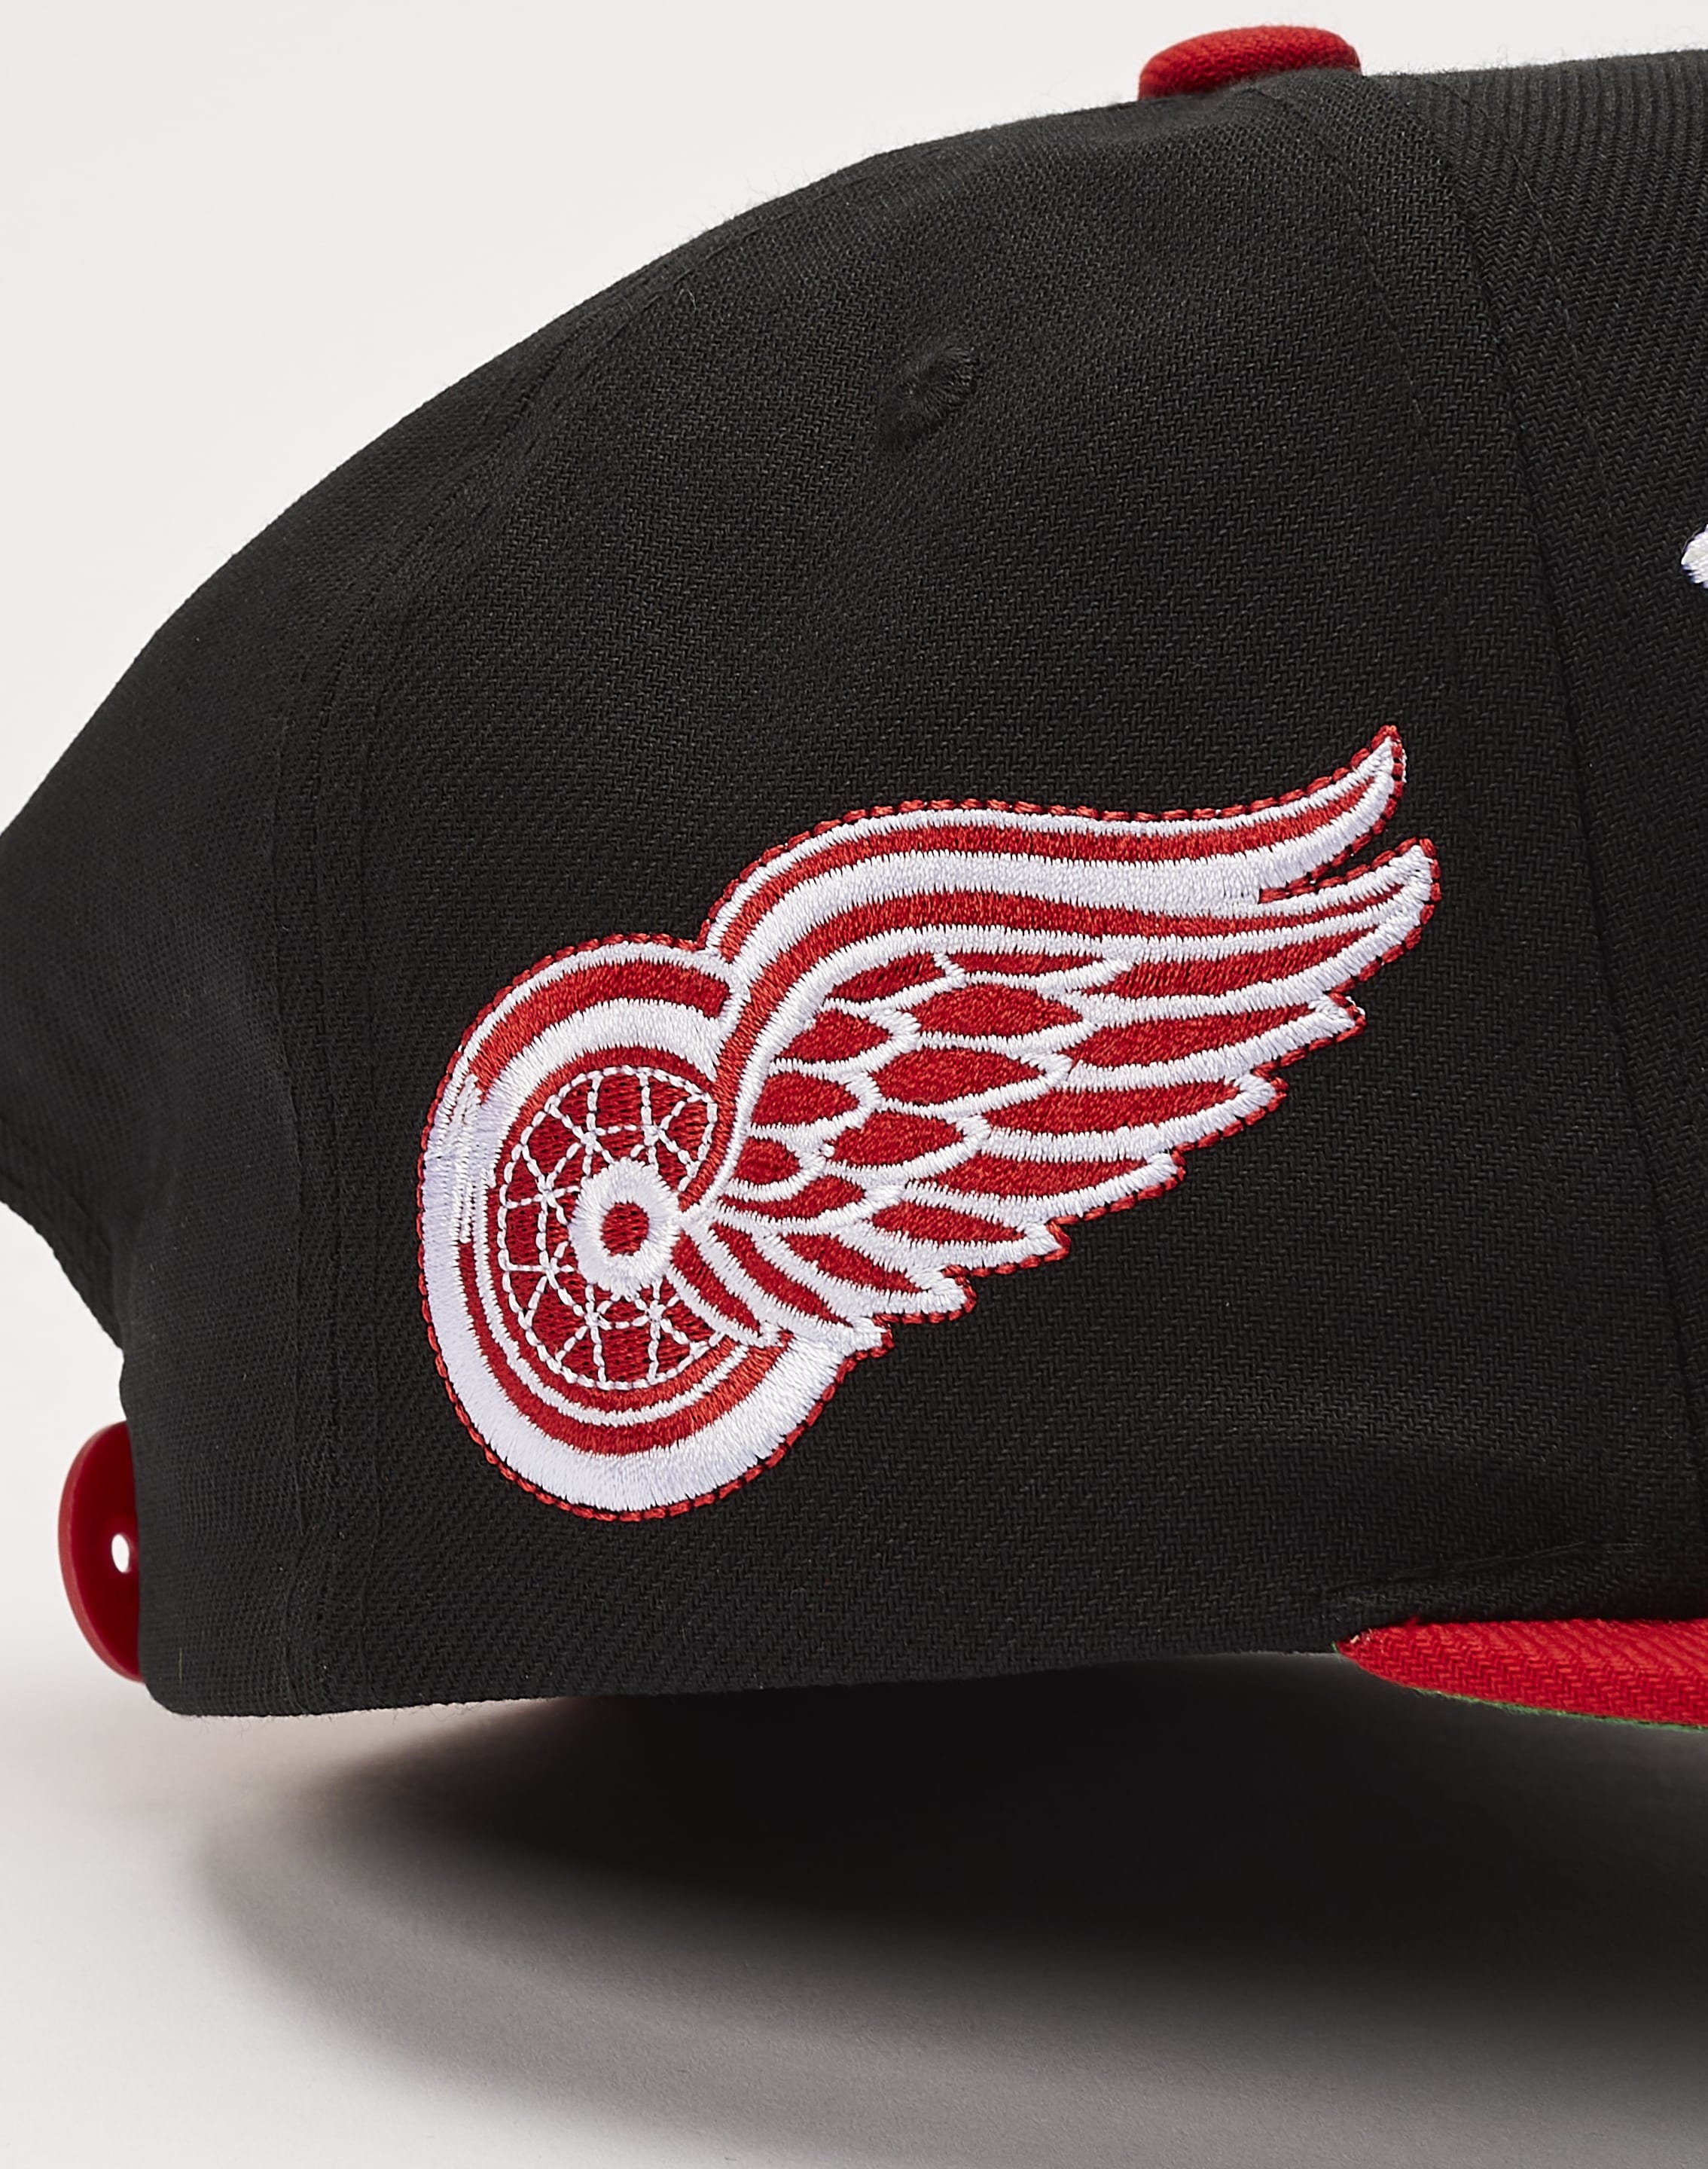 Detroit Red Wings Upside Down Logo Snapback - Mitchell & Ness cap